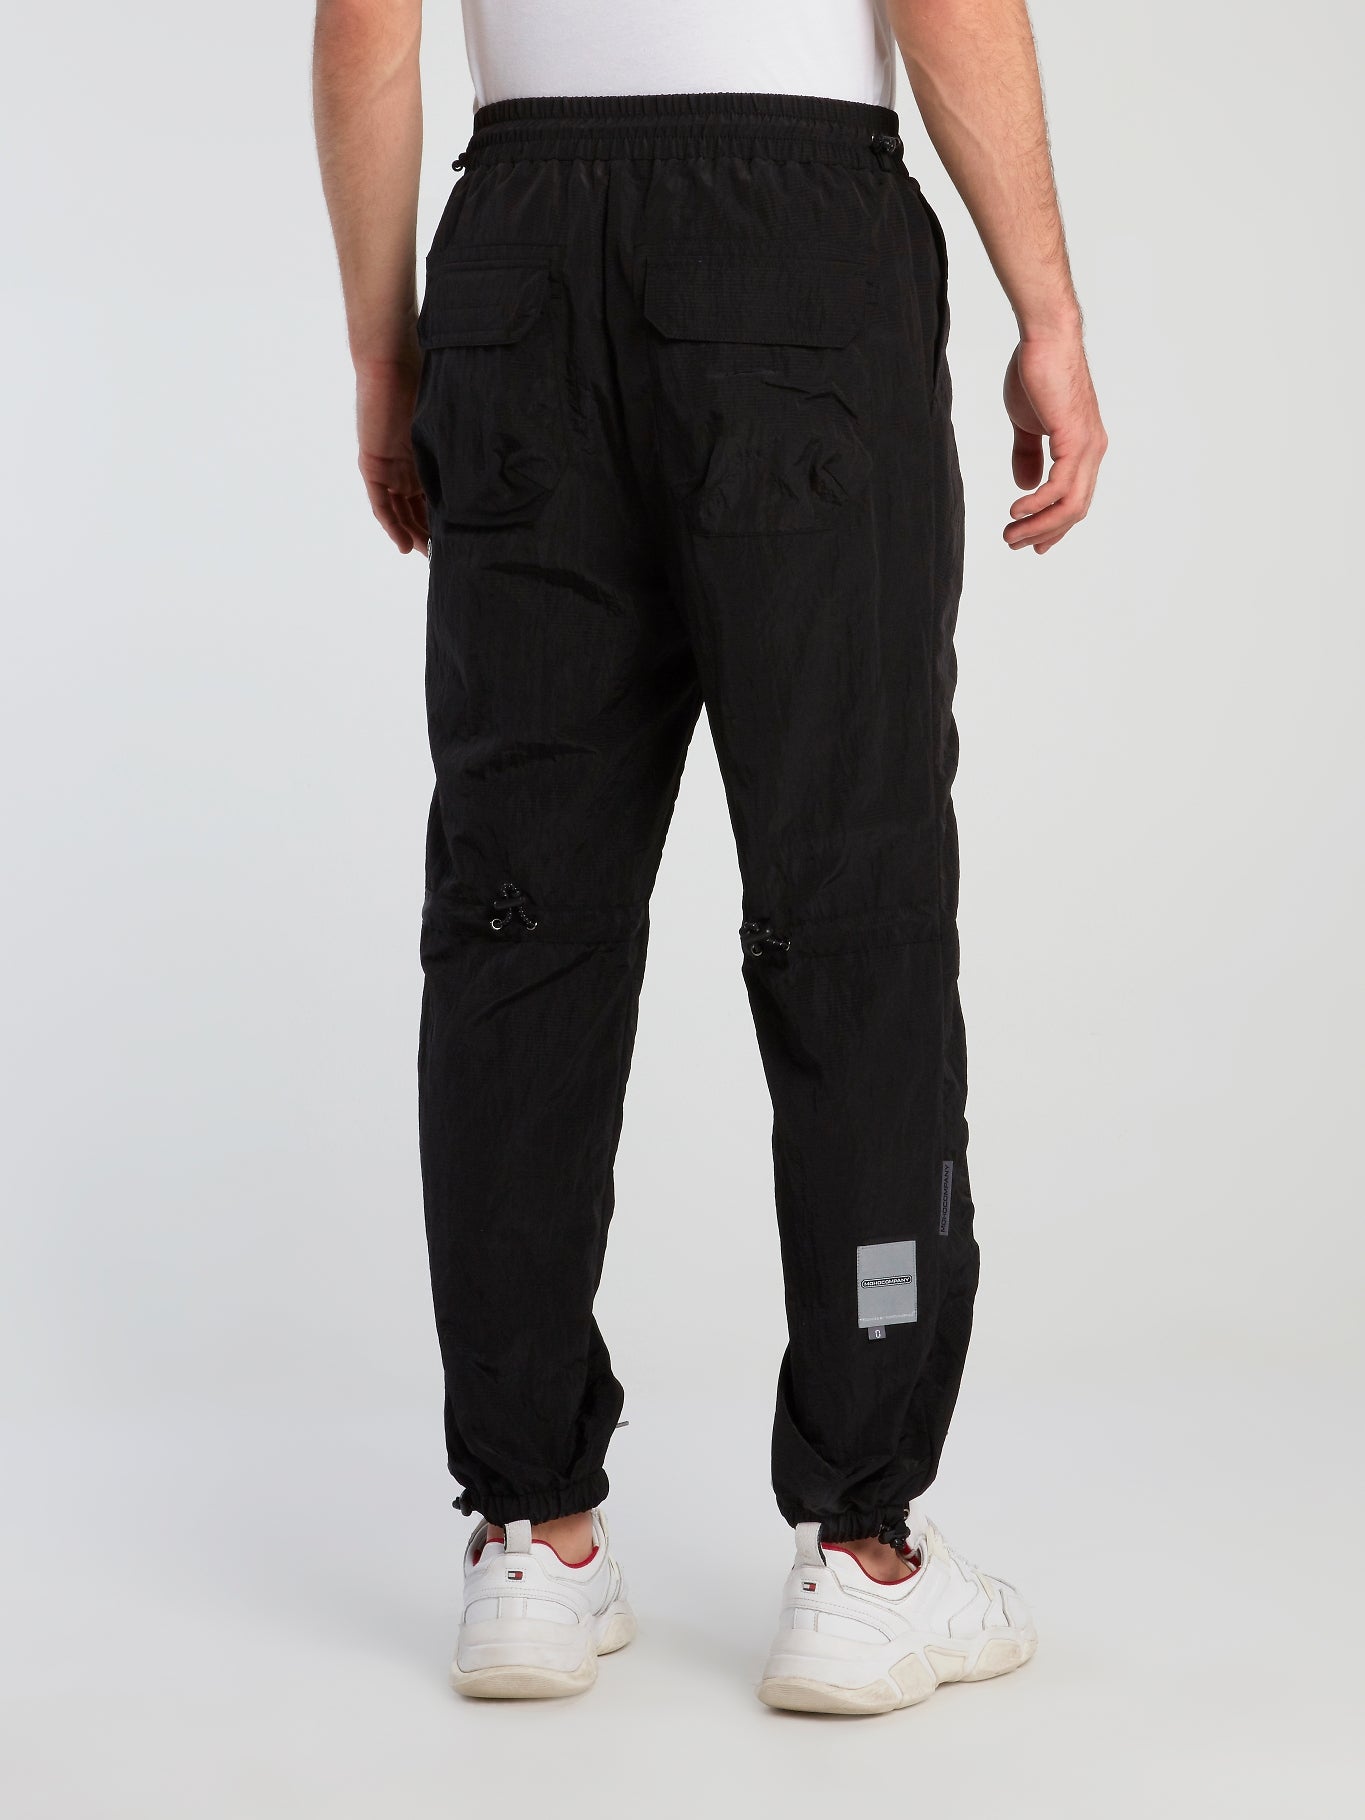 Black Technical Zip Up Trousers